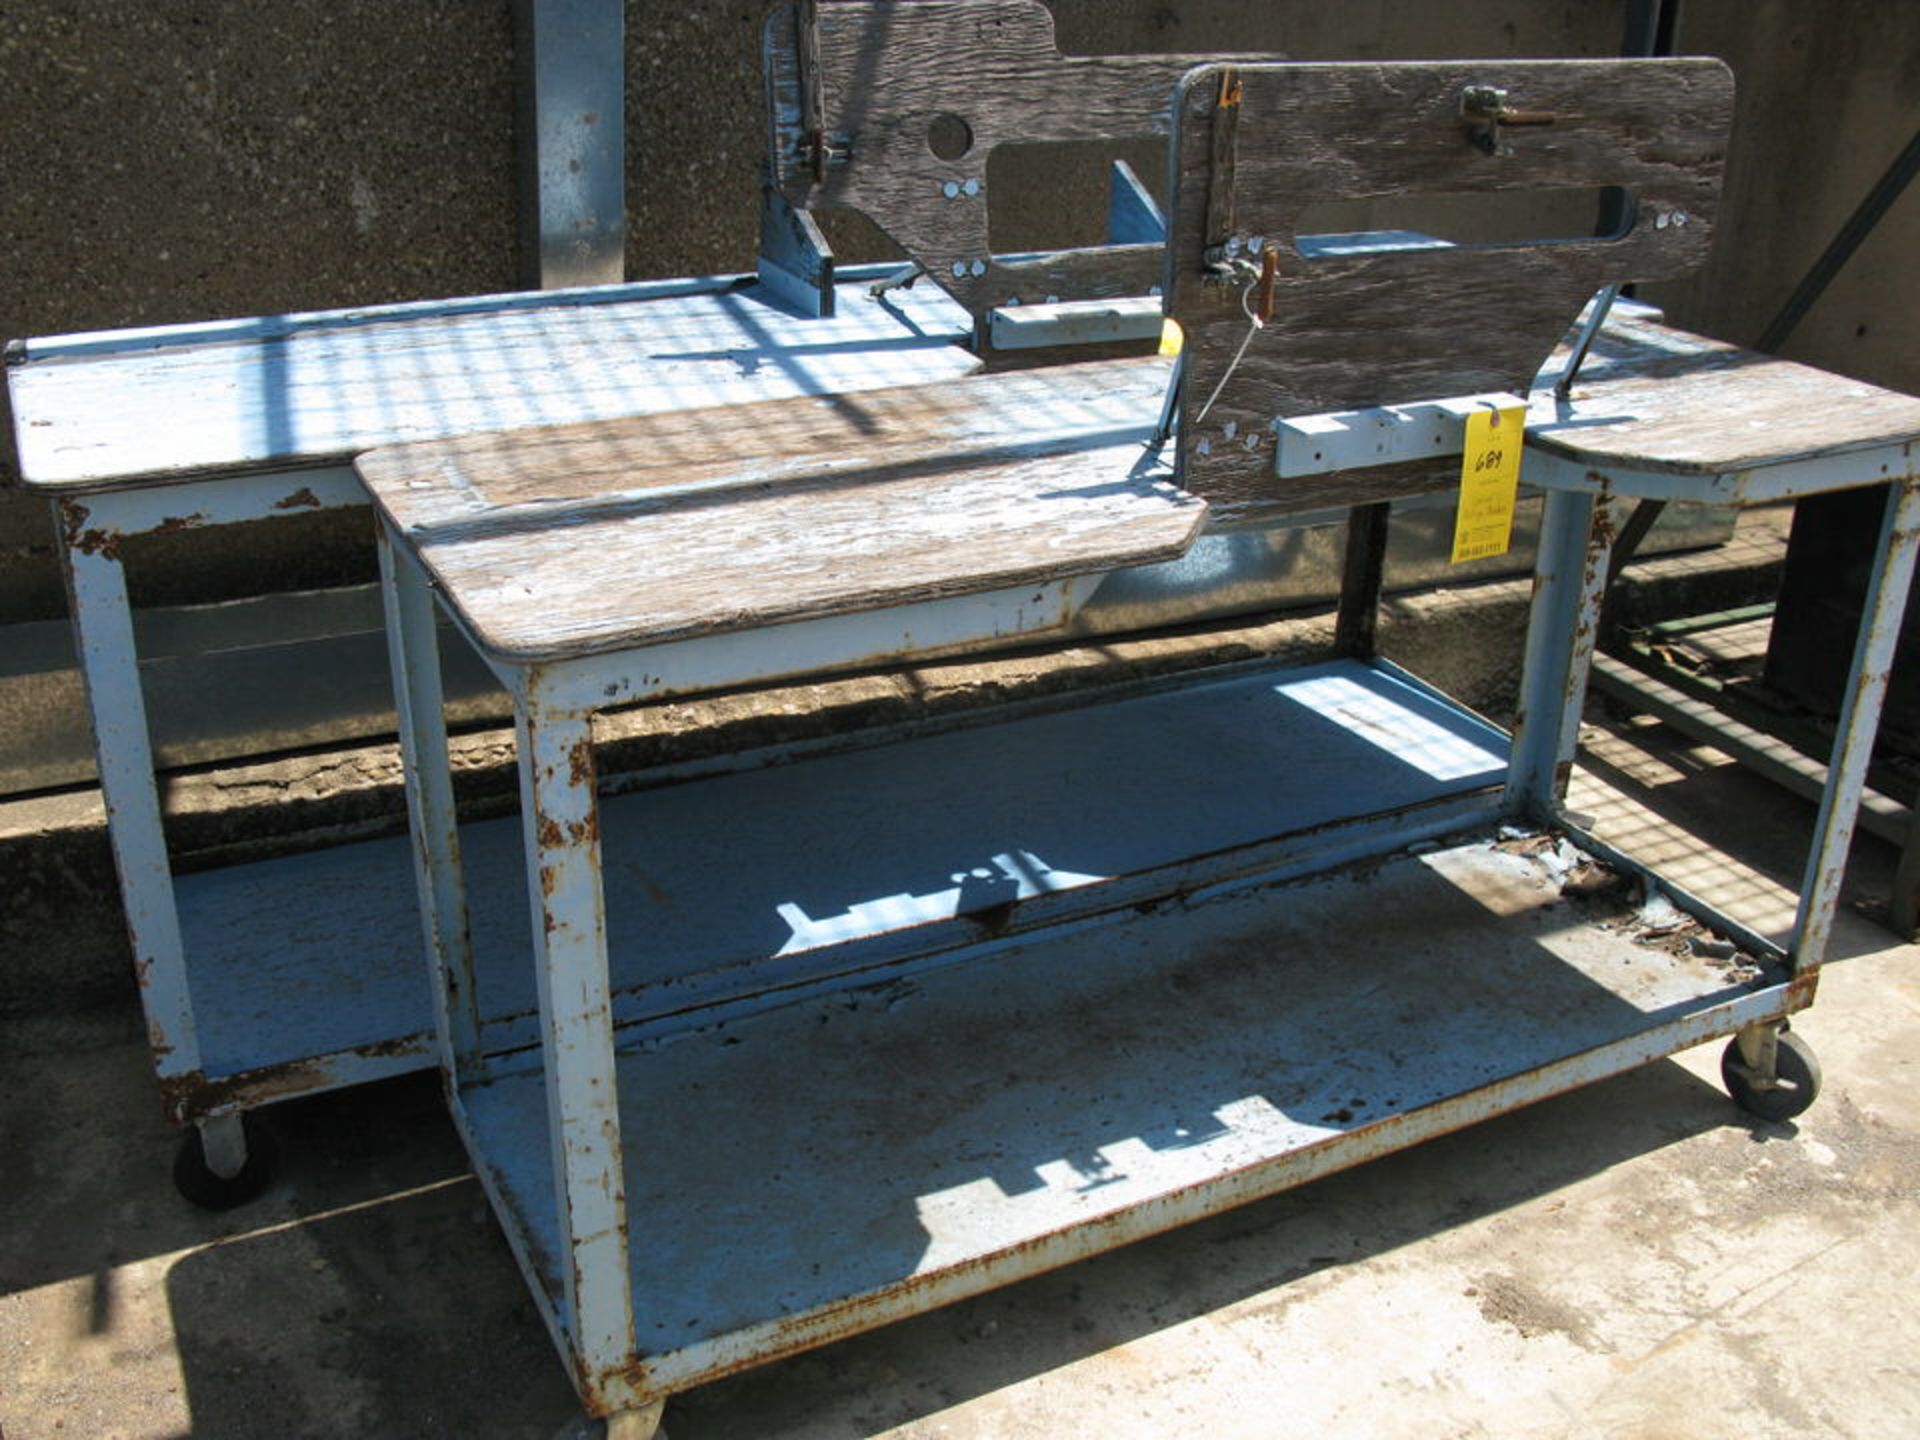 (2) Blue Metal Rolling Carts with Wood Tops & Flip-up Panel with Cut-Out